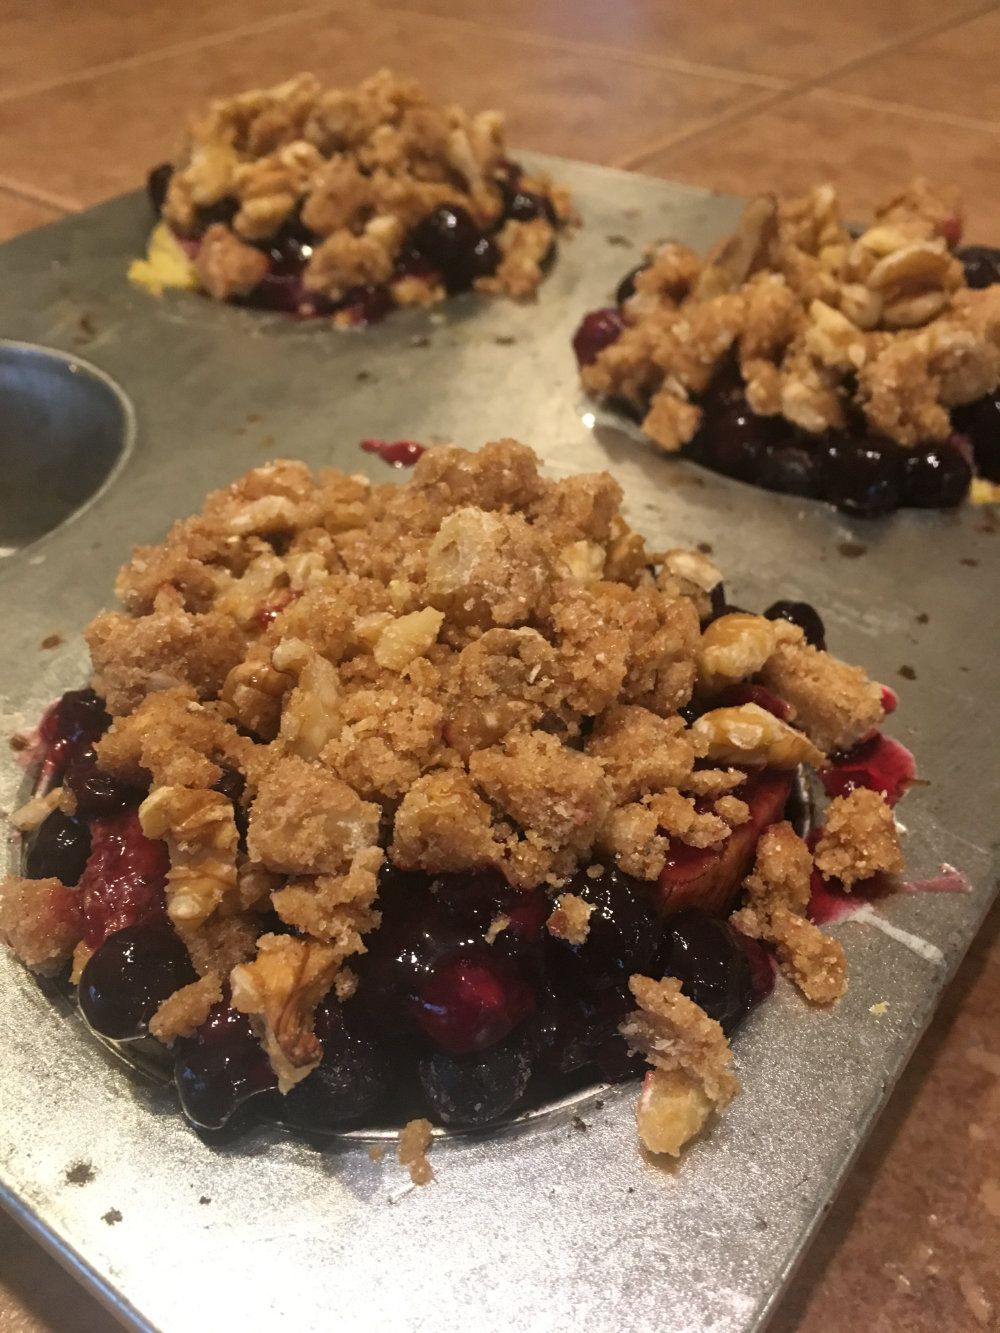 Baked French toast with blueberry compote and sugared nuts are served out of a muffin tin.